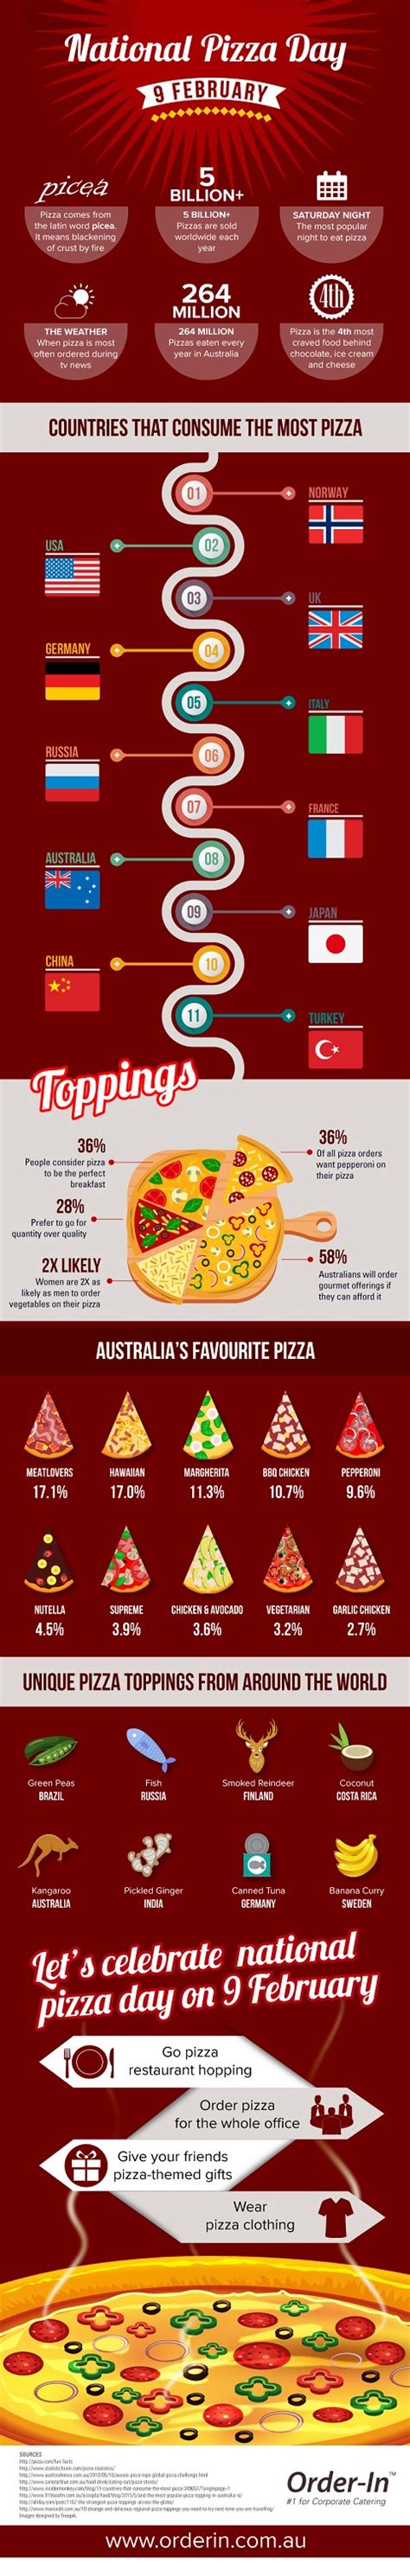 How To Celebrate National Pizza Day On 9 February Eatfirst Blog